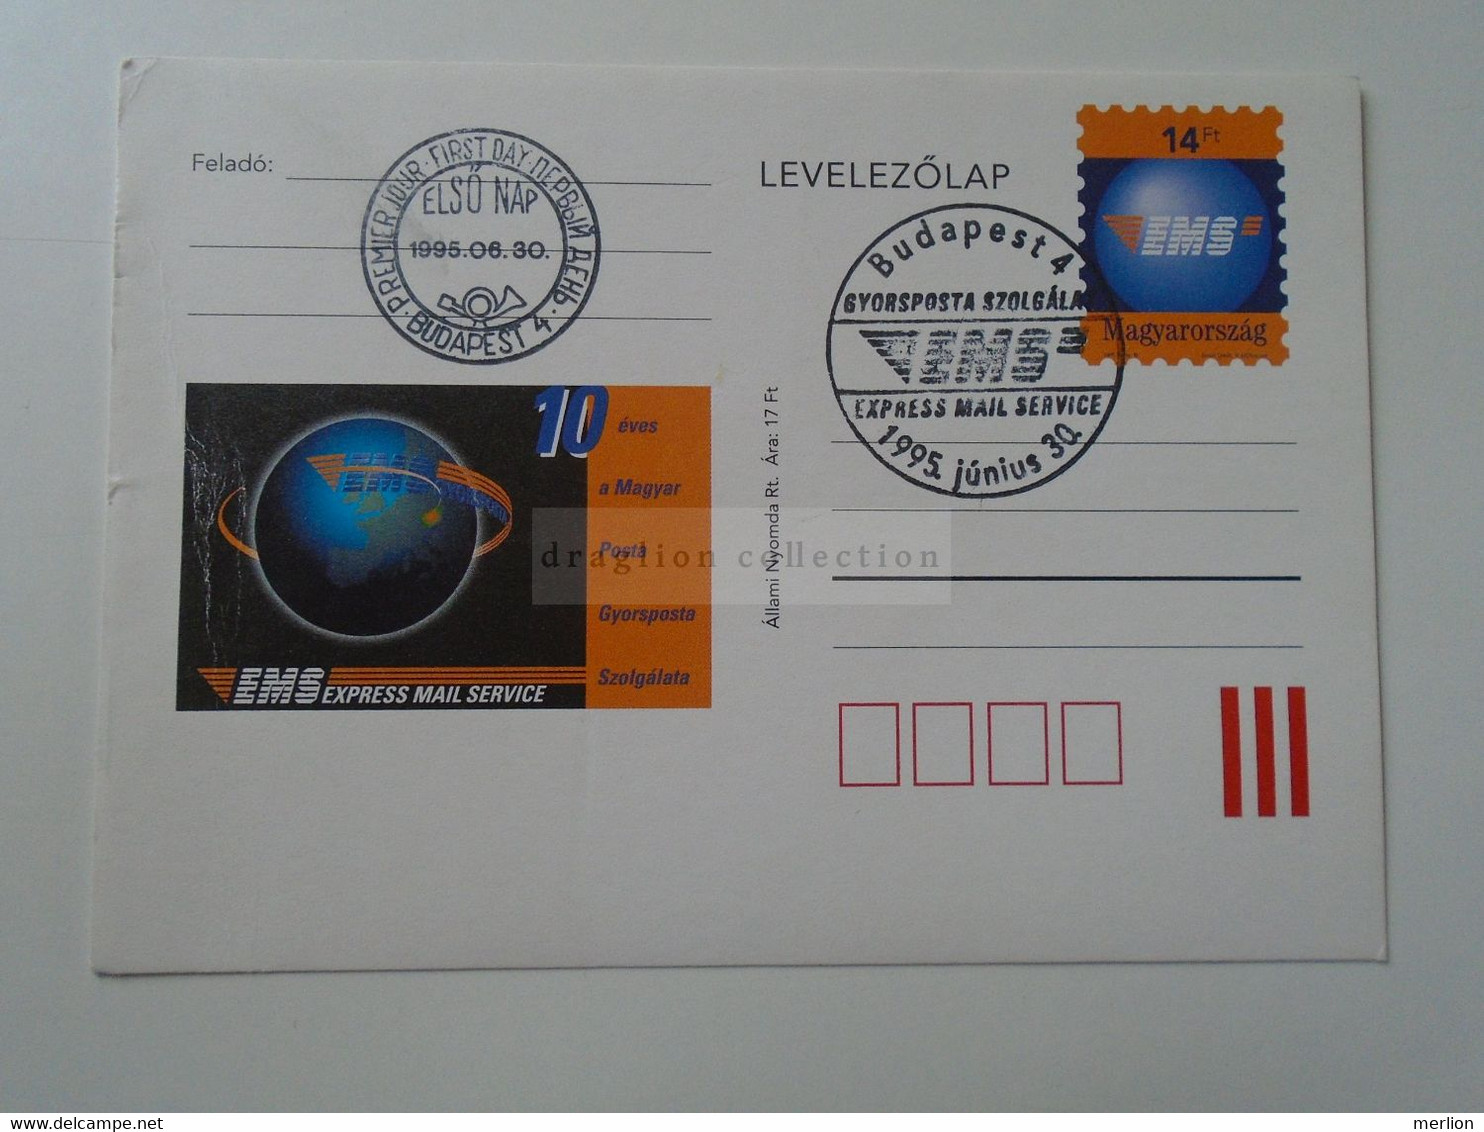 D187105 HUNGARY- Stationery -Postmark  MAGYAR POSTA -Hungarian Post - EMS Express Mail Service  1995 - Postmark Collection